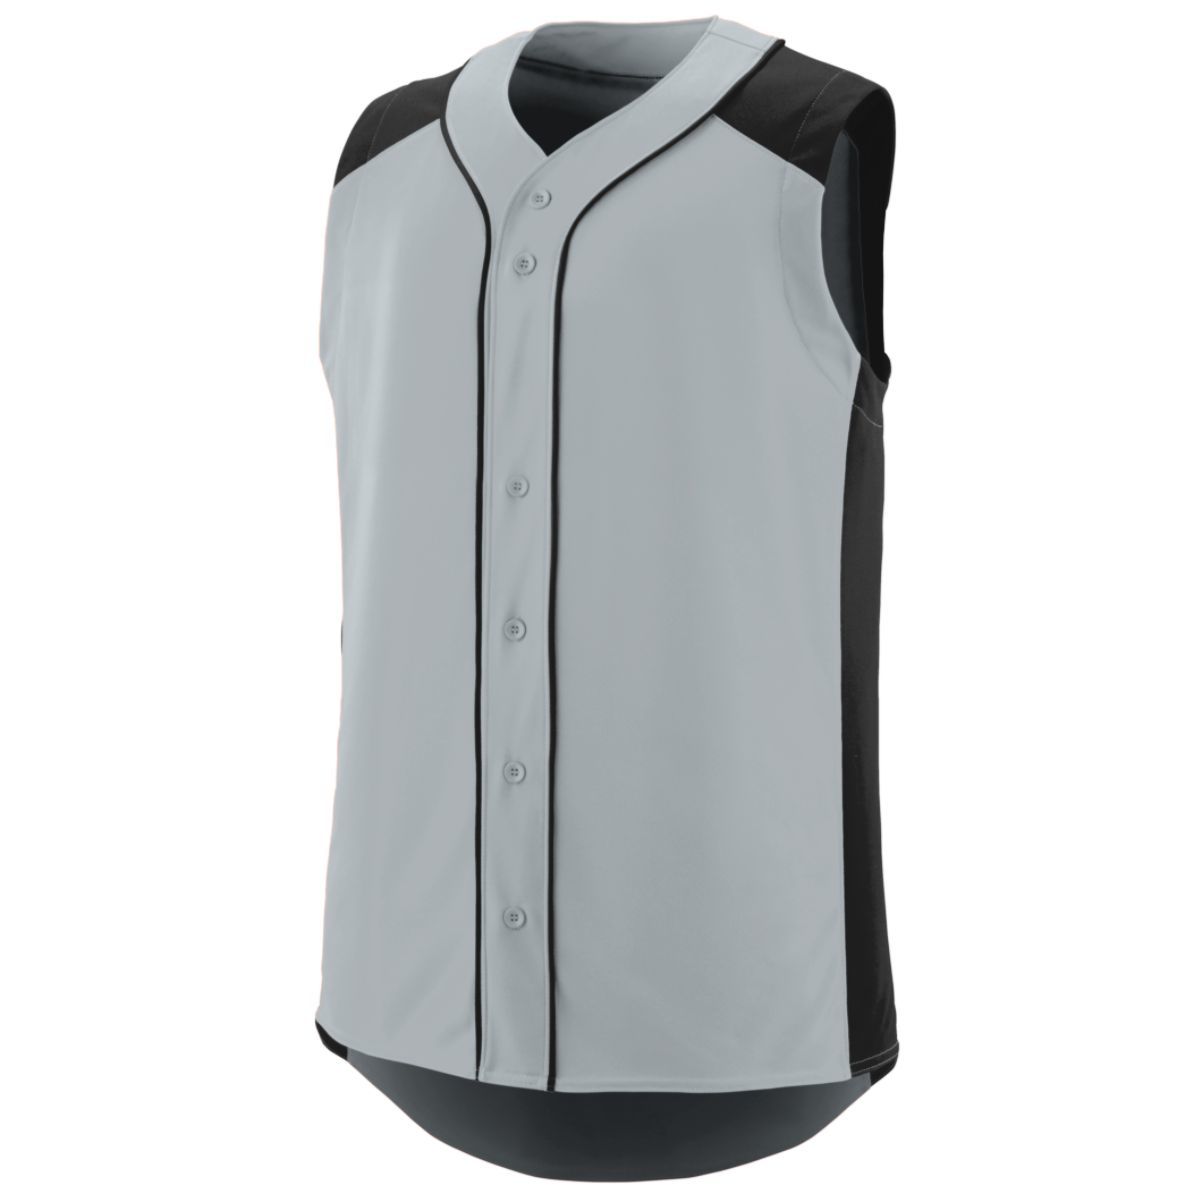 Augusta Sportswear Youth Sleeveless Slugger Jersey in Silver/Black  -Part of the Youth, Youth-Jersey, Augusta-Products, Baseball, Shirts, All-Sports, All-Sports-1 product lines at KanaleyCreations.com